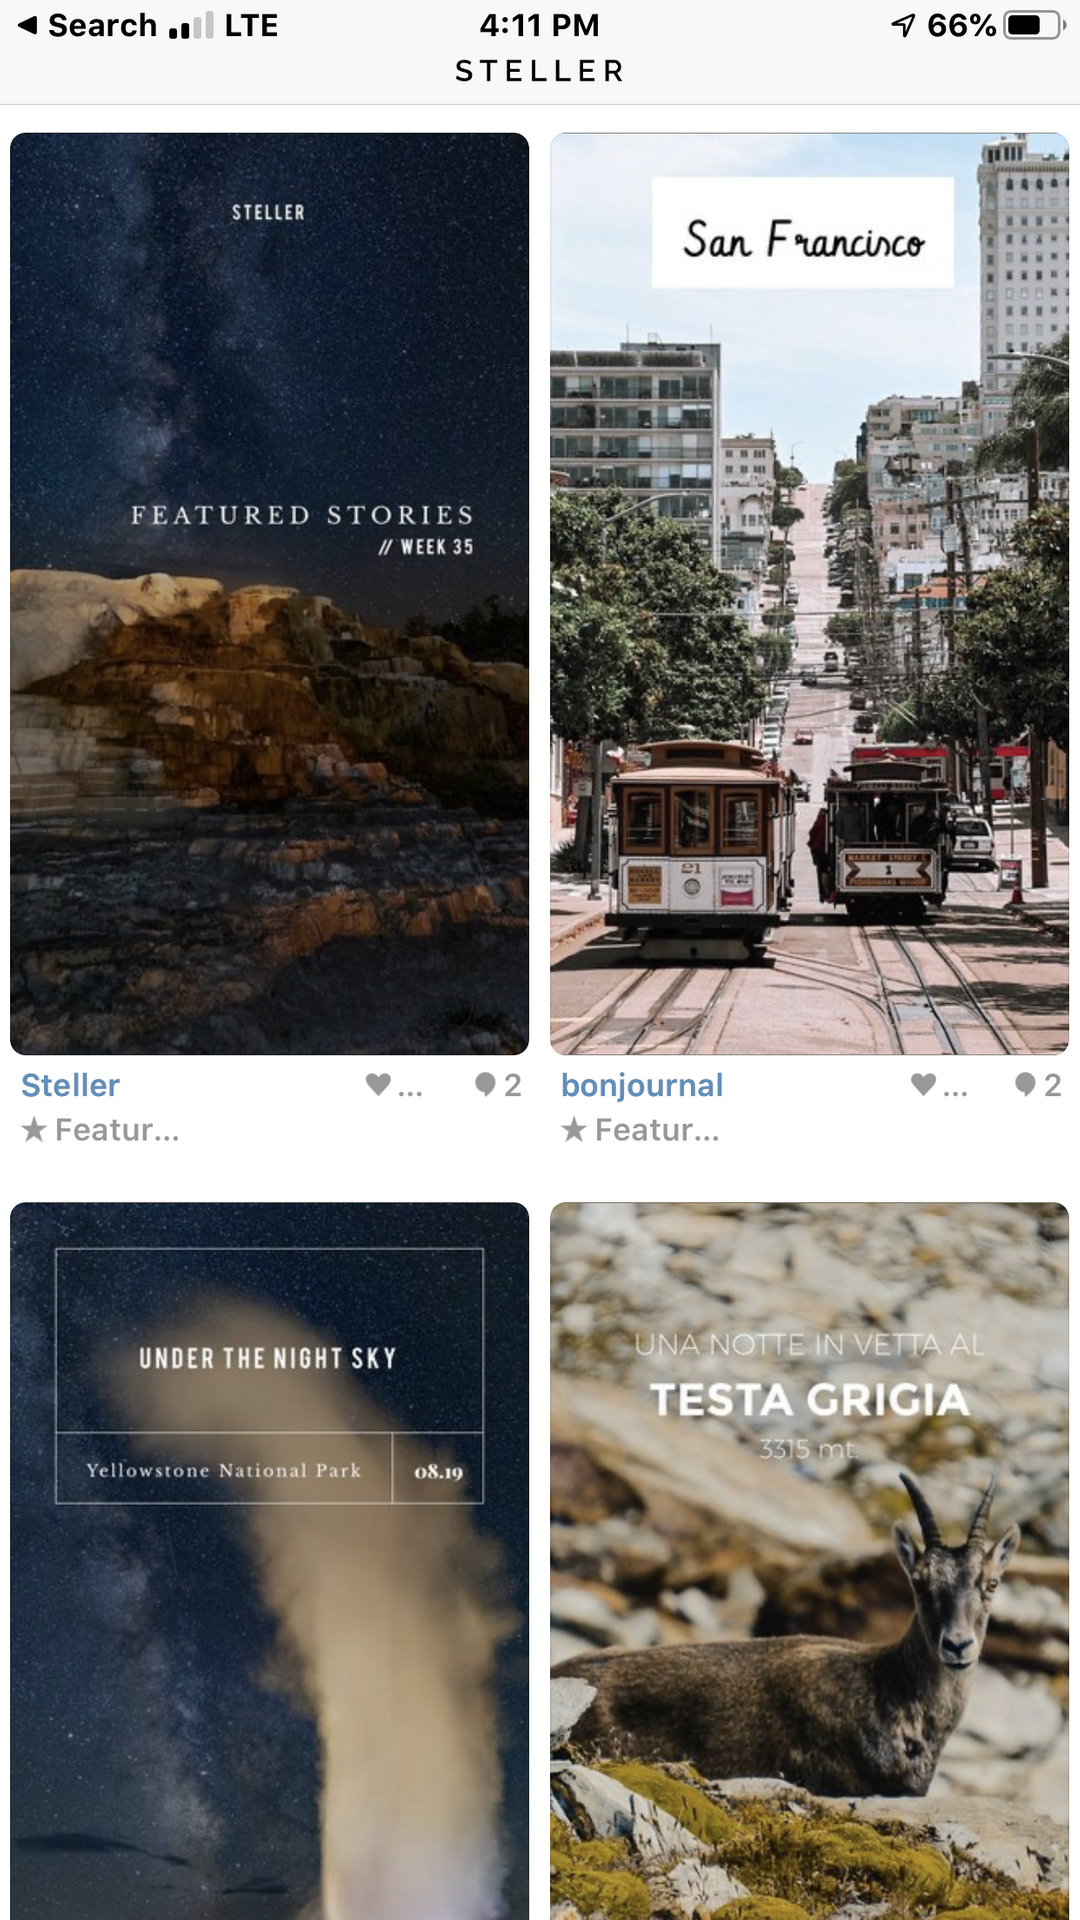 Once an Apple iPhone app of year, Steller revived for travel stories